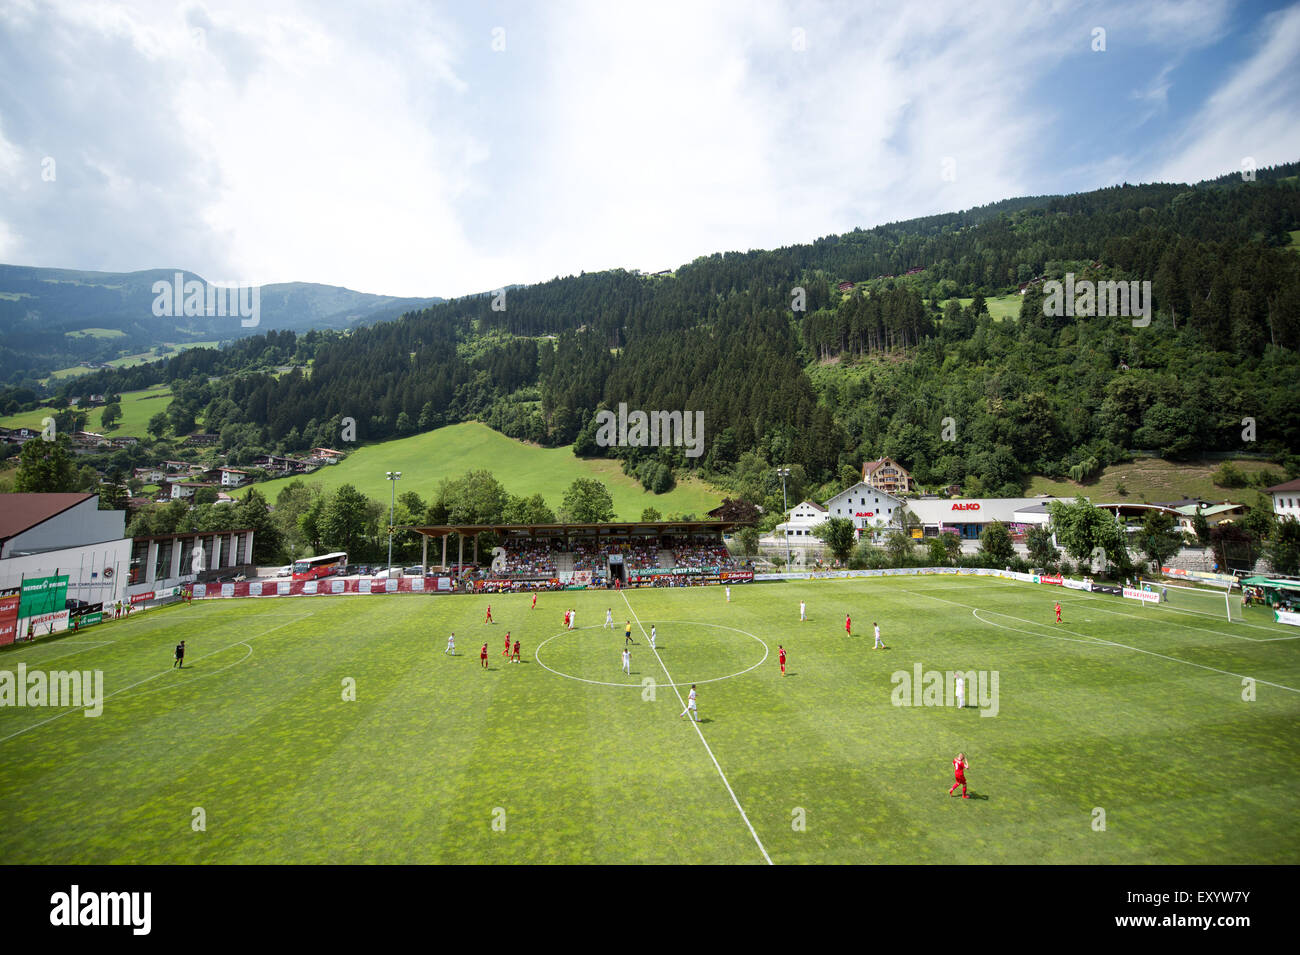 The teams stand on the pitch for the friendly match between FC Zbrojovka Brunn and Werder Bremen at the Parkstadion in Zell am Ziller, Austria, 18 July 2015. Photo: Daniel Naupold/dpa Stock Photo